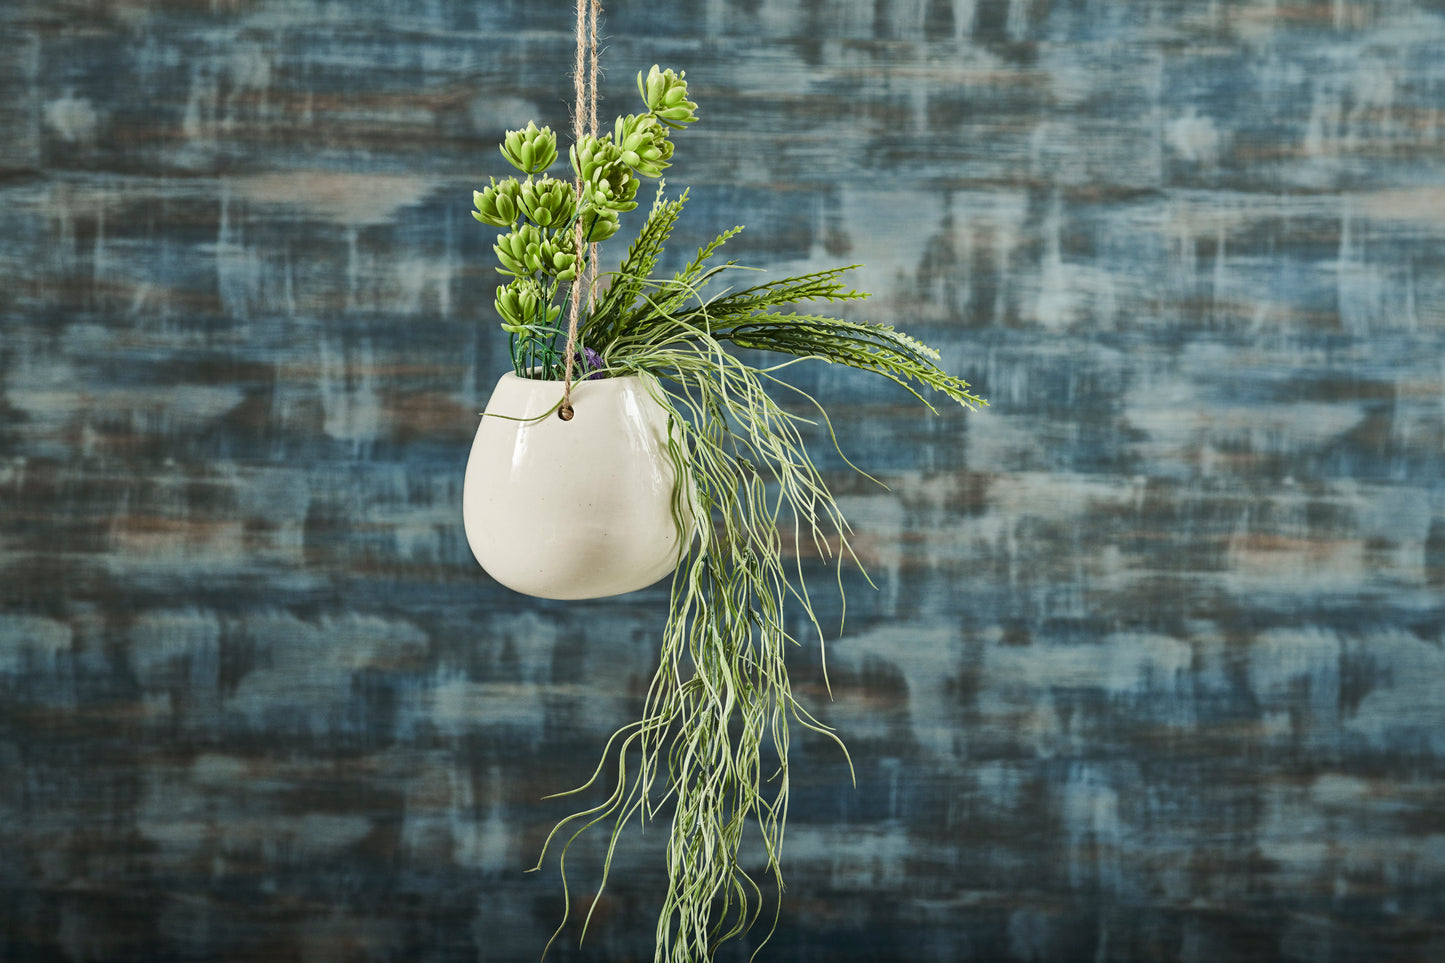 A Tiny Mistake Hanging White Ceramic Planter with Jute Rope (One Piece)